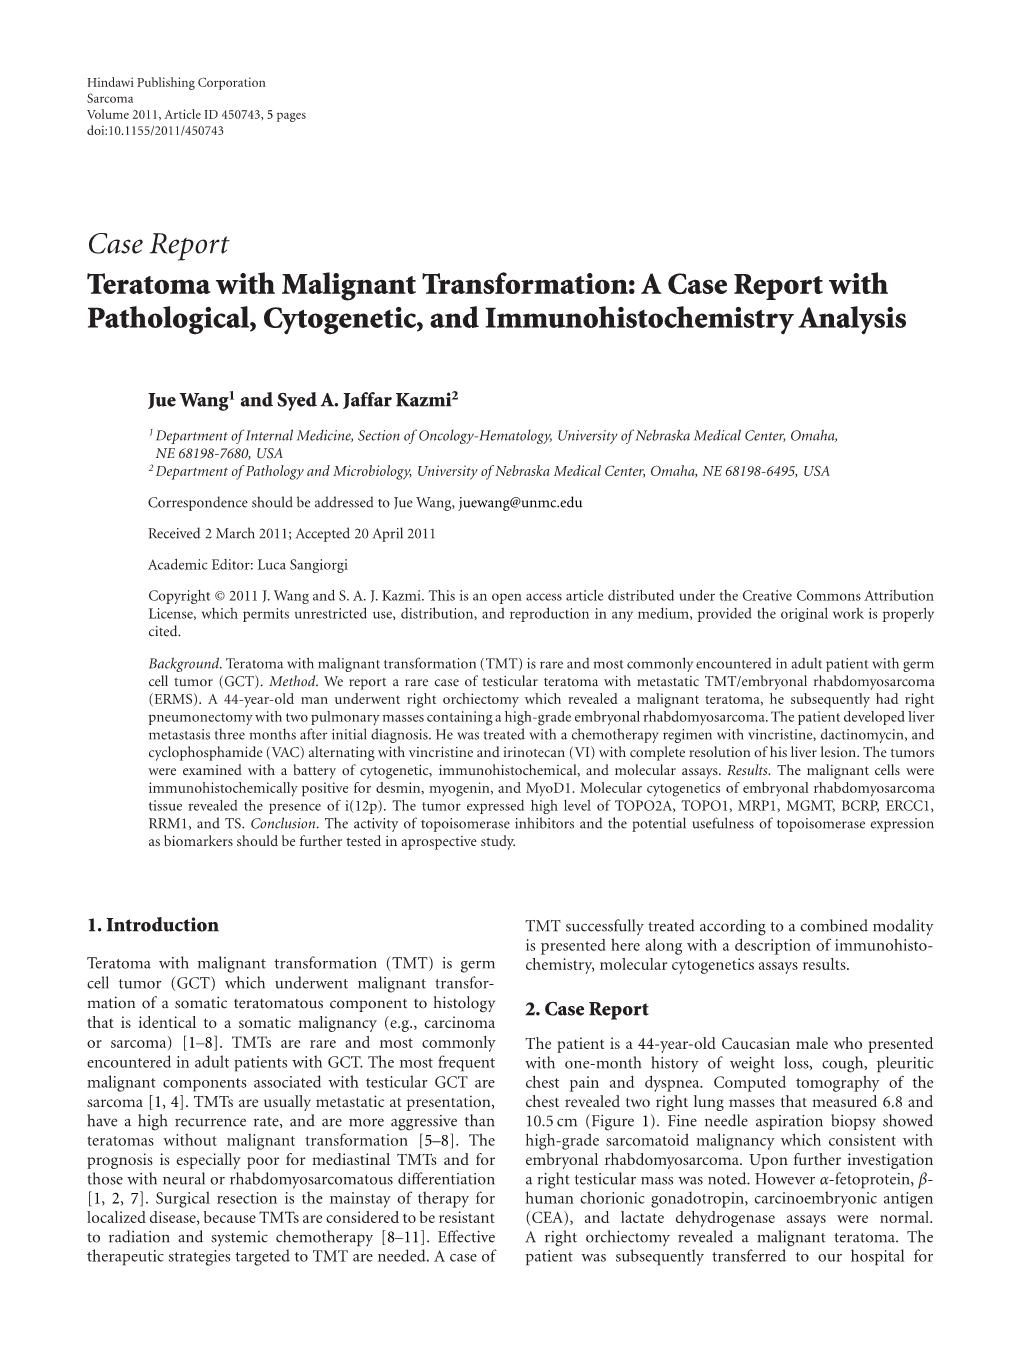 Teratoma with Malignant Transformation: a Case Report with Pathological, Cytogenetic, and Immunohistochemistry Analysis